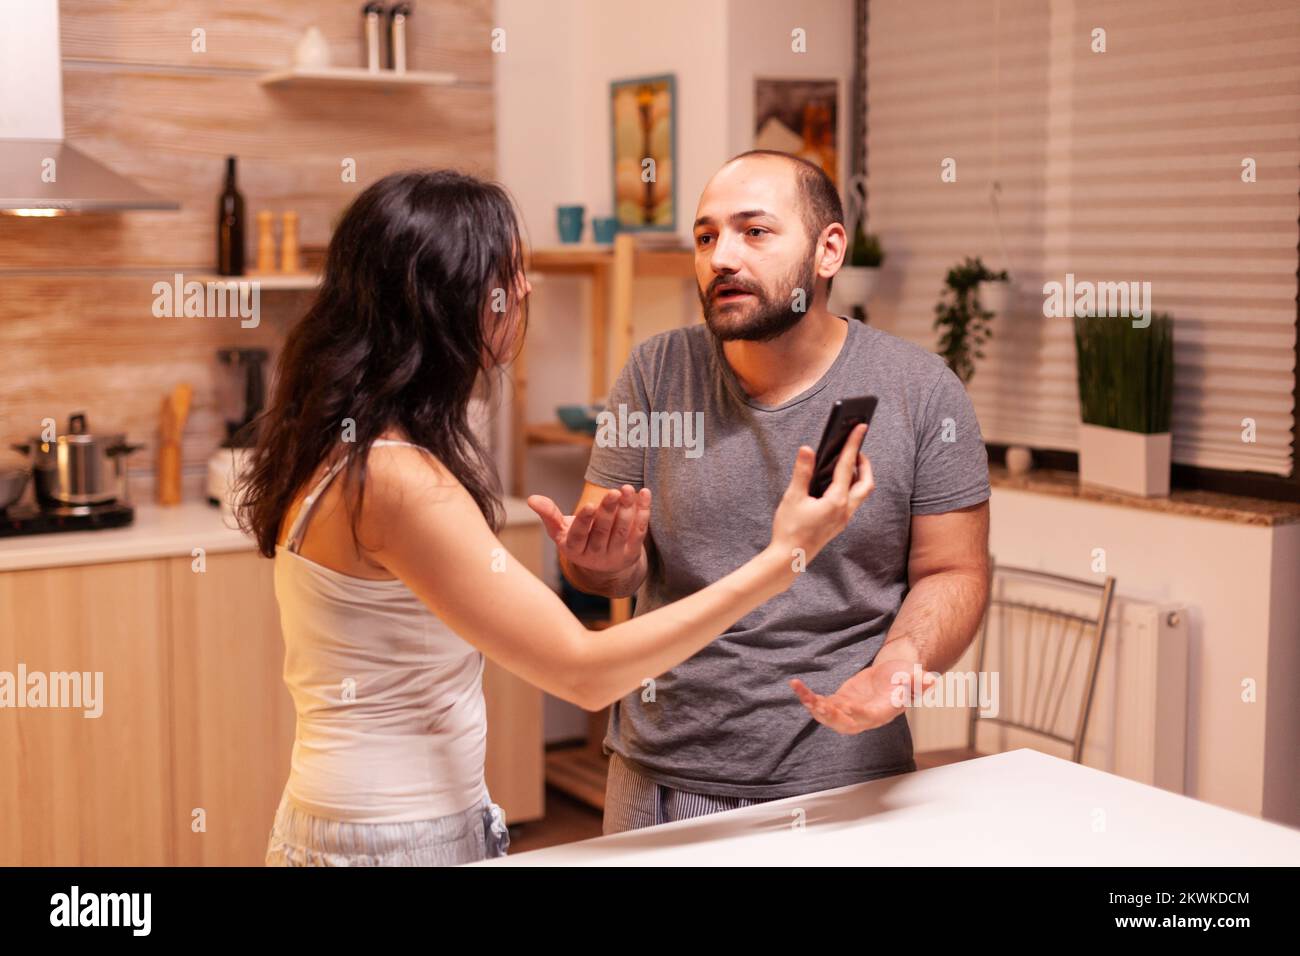 Husband caught cheating having a conflict with wife in home kitchen. Heated angry frustrated offended irritated accusing her man of infidelity showing him messages on smartphone yelling desperate. Stock Photo